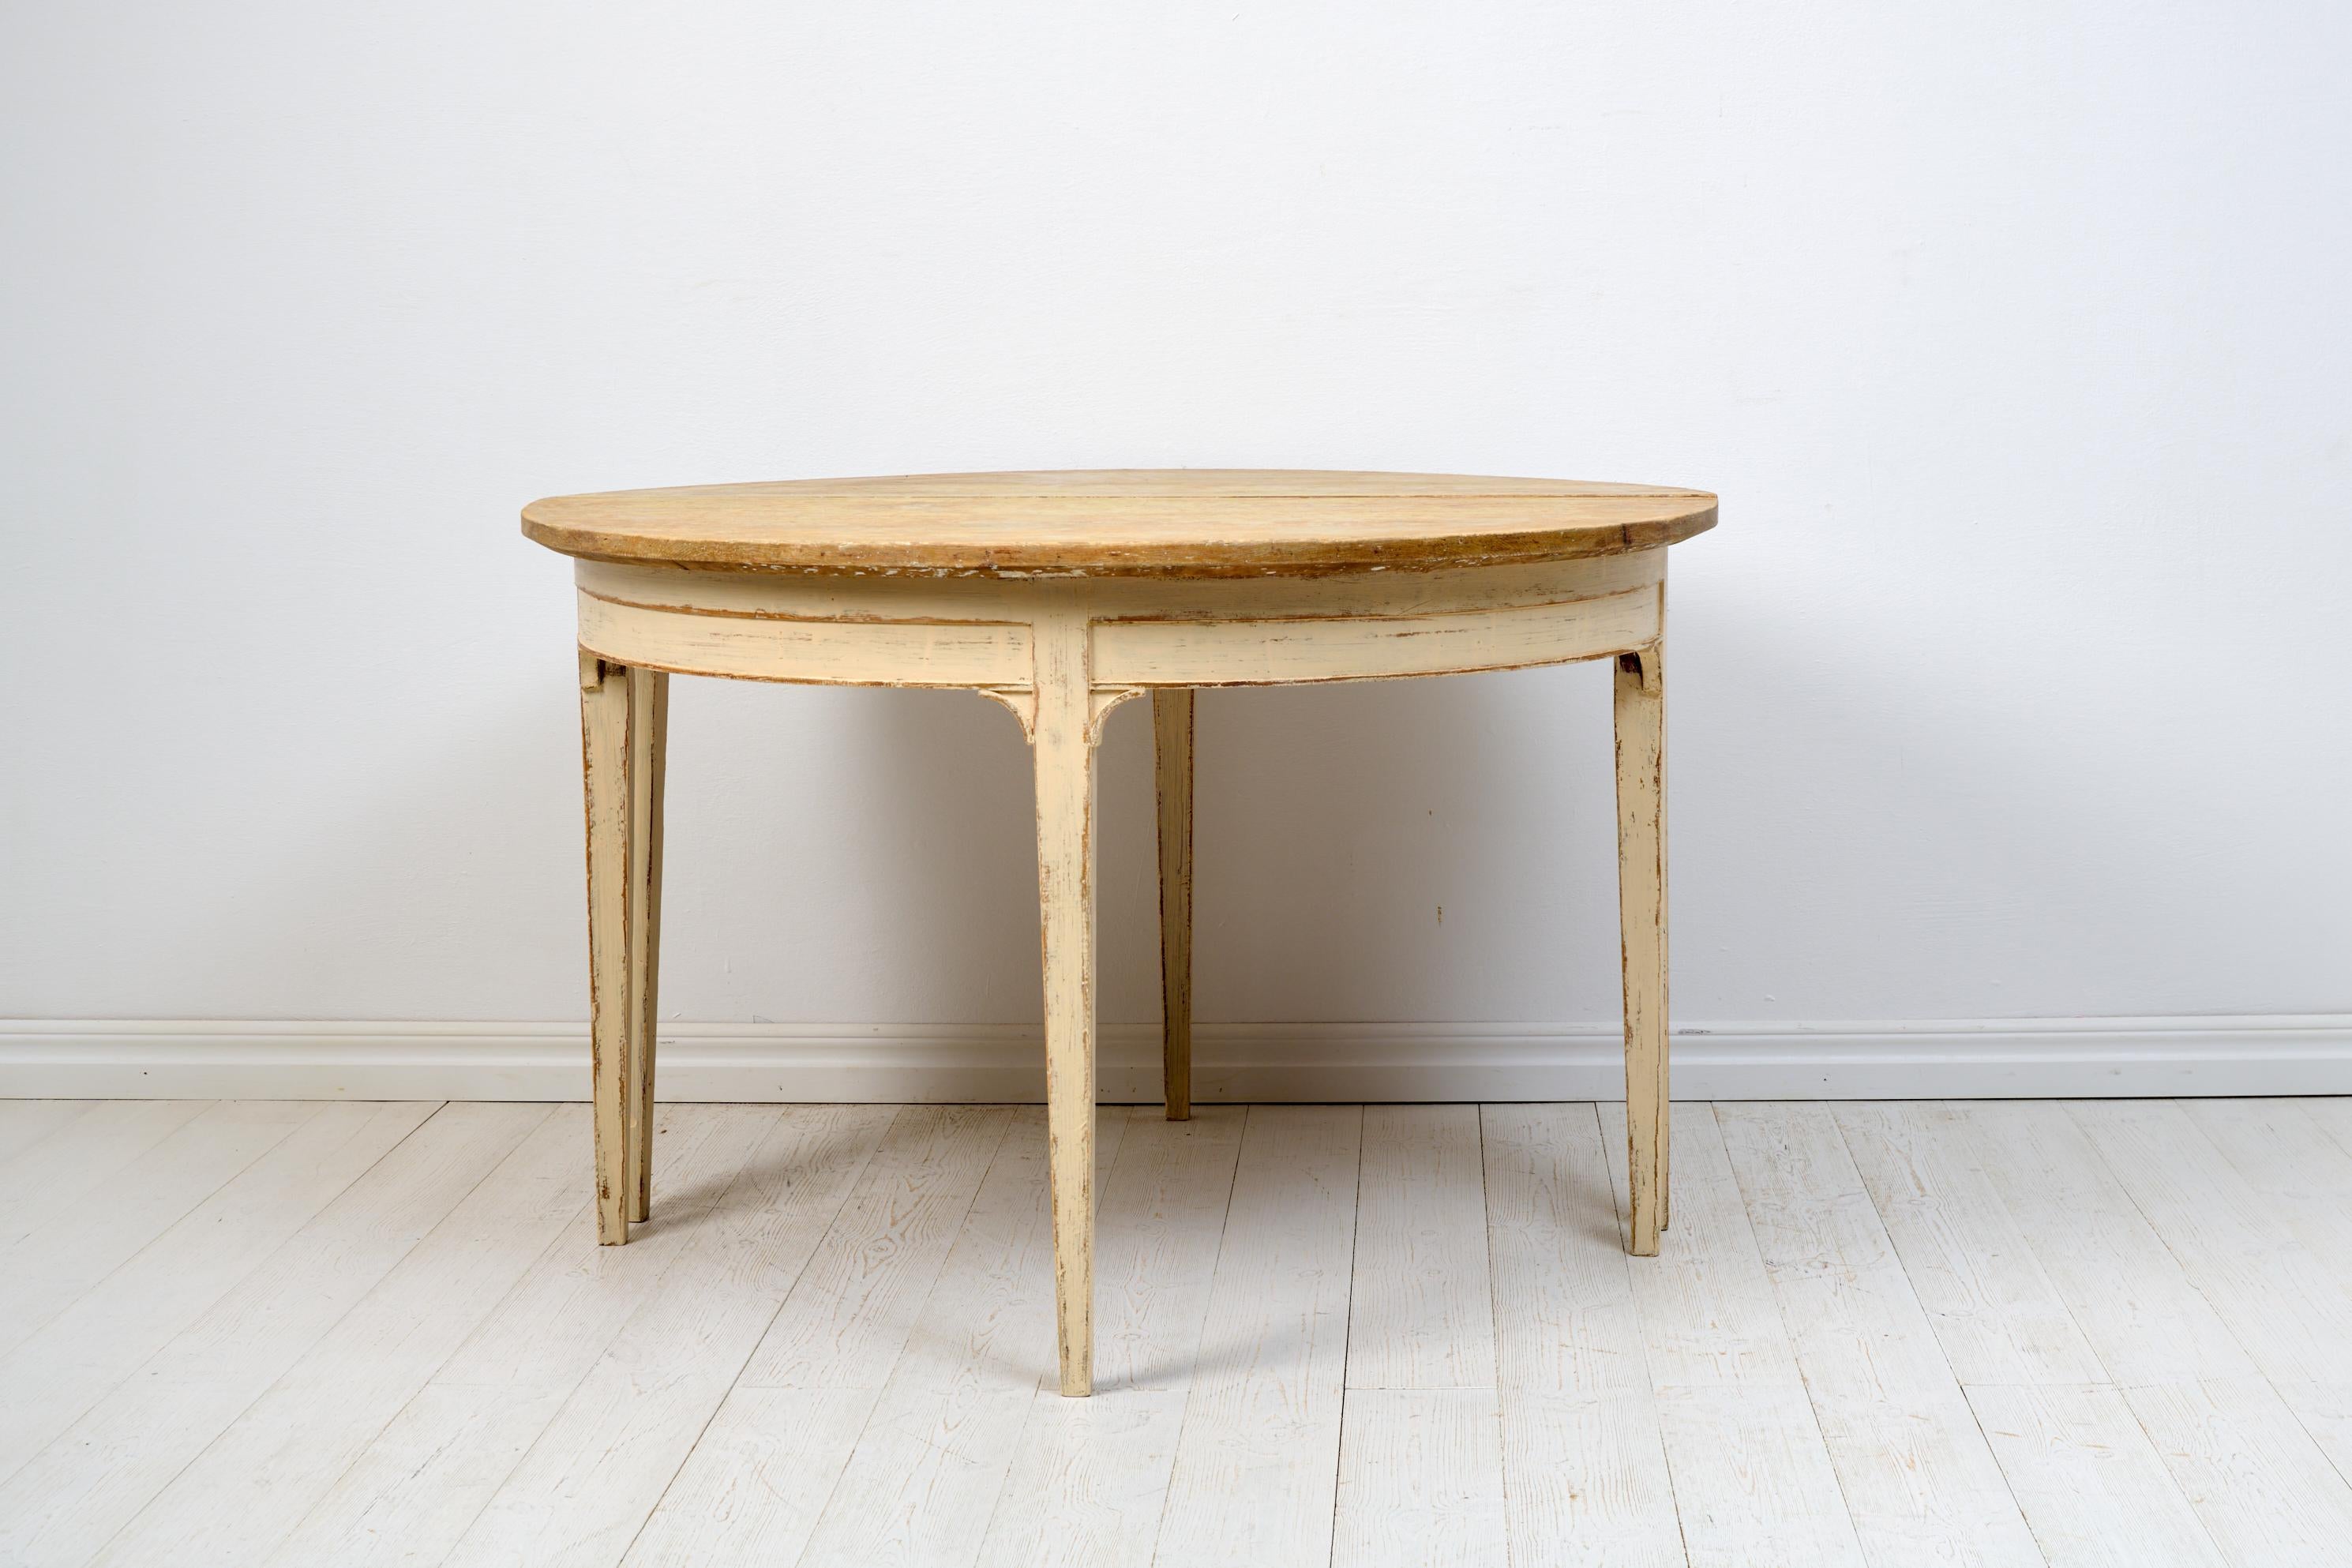 Genuine Swedish demi-lune table. The table consists of two freestanding half-circle tables with straight tapered legs and corner consoles between the legs and apron. They can be used separately, for example as console tables, or together as a round